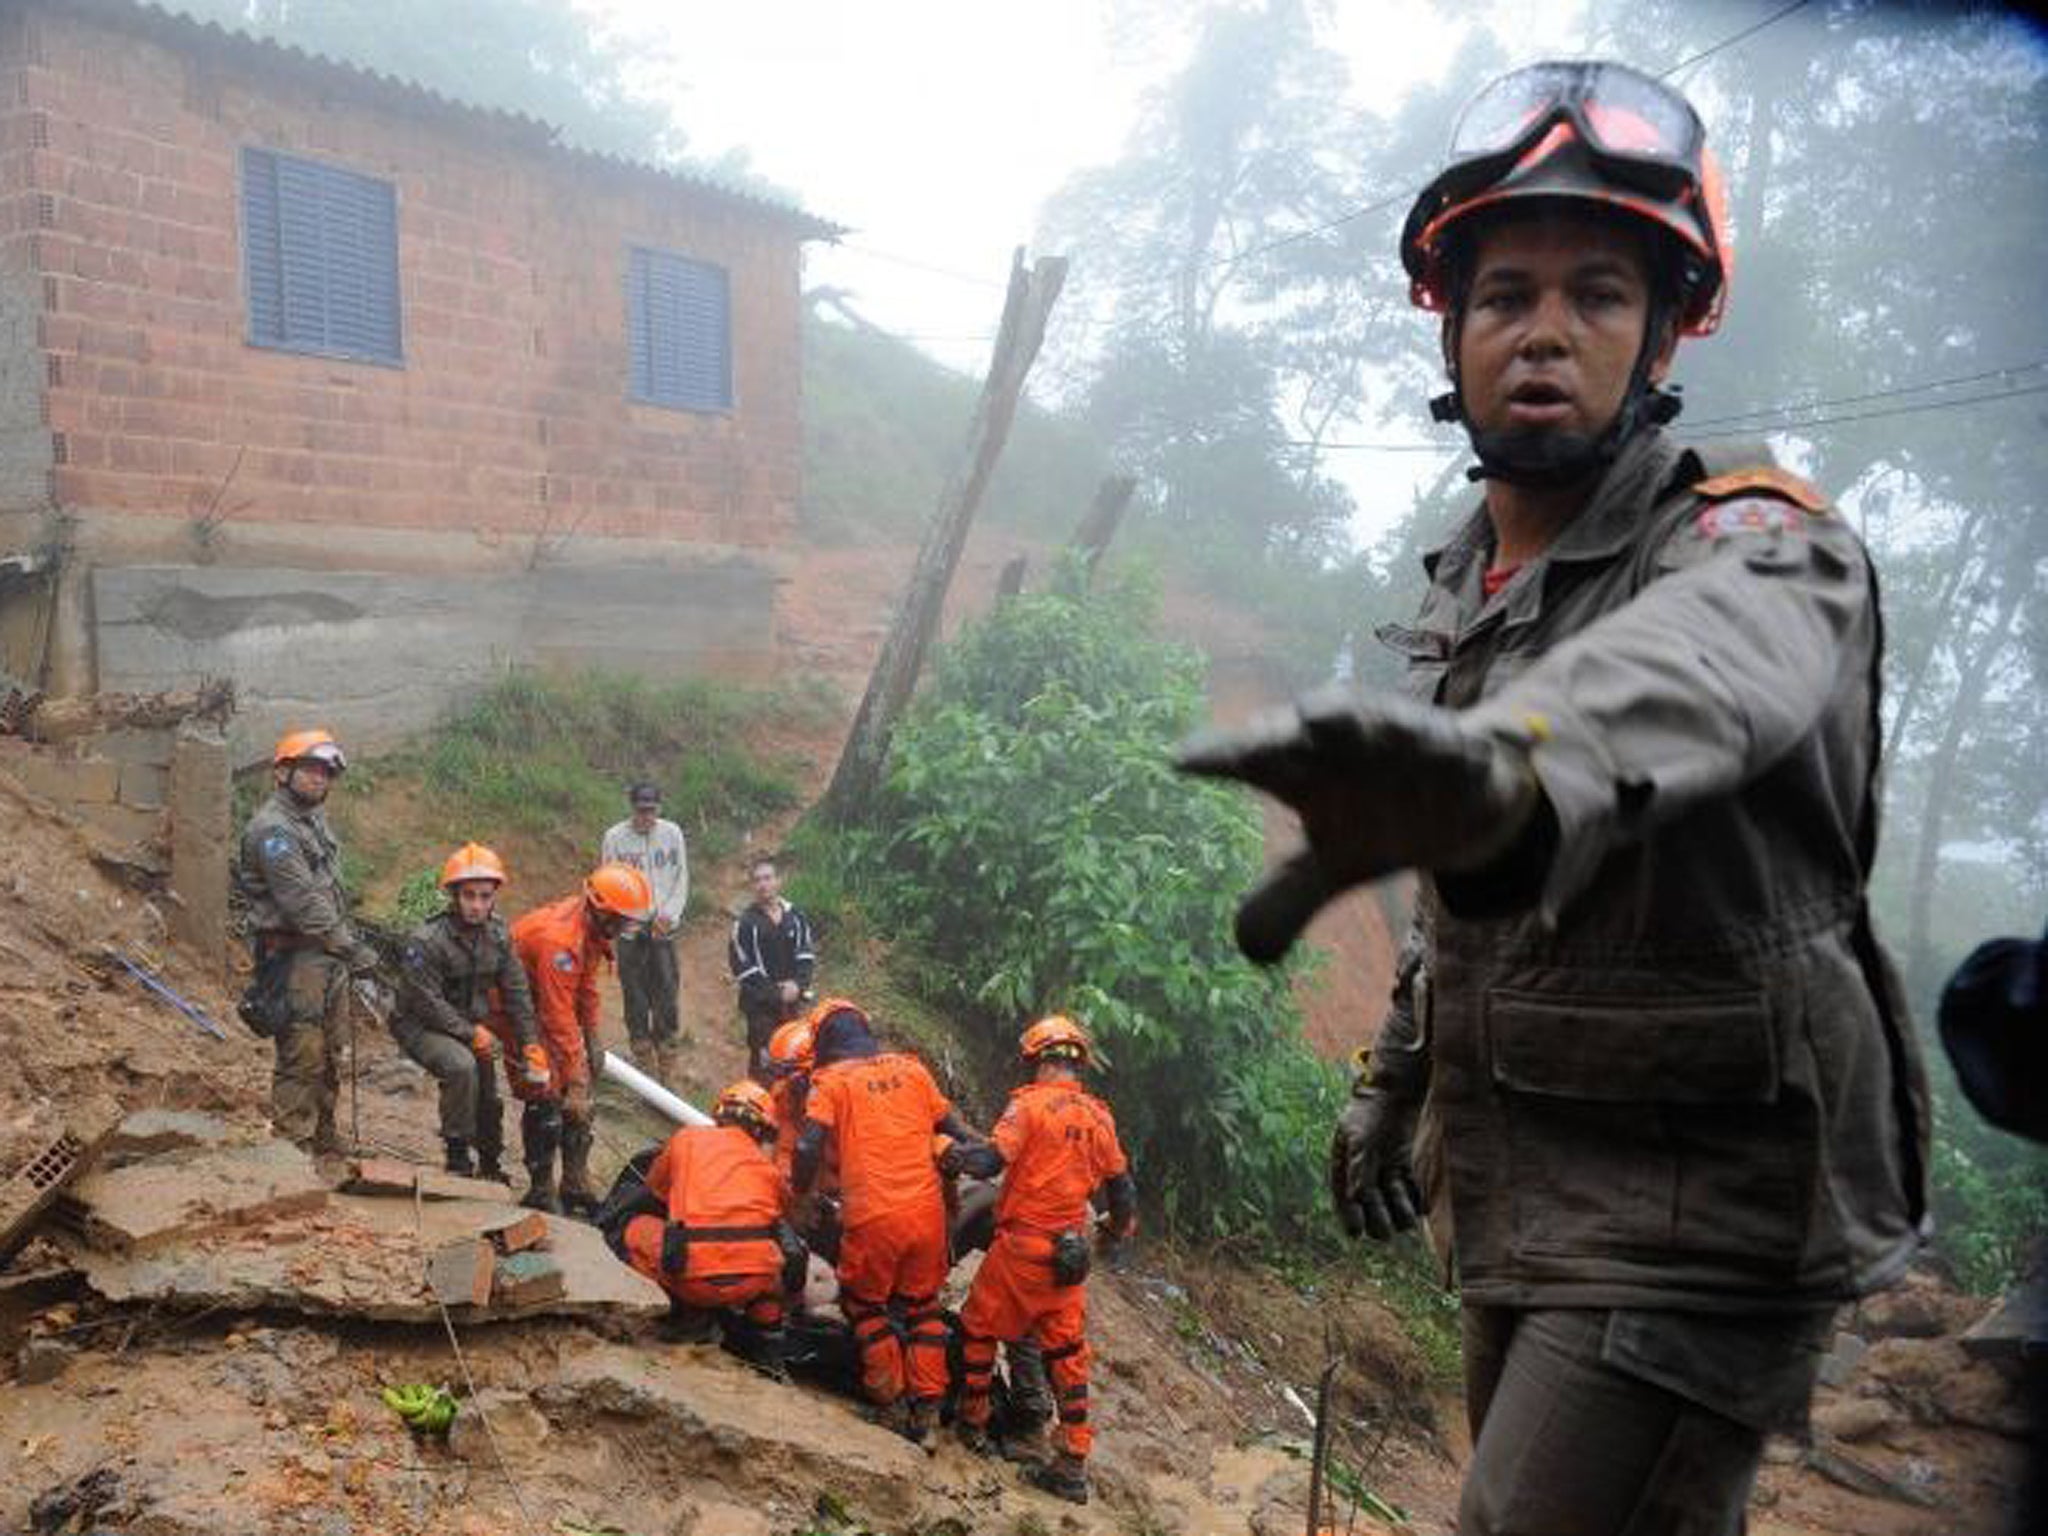 A rescue worker gestures as his colleagues carry the body of a victim of a mudslide in Petropolis, near Rio de Janeiro